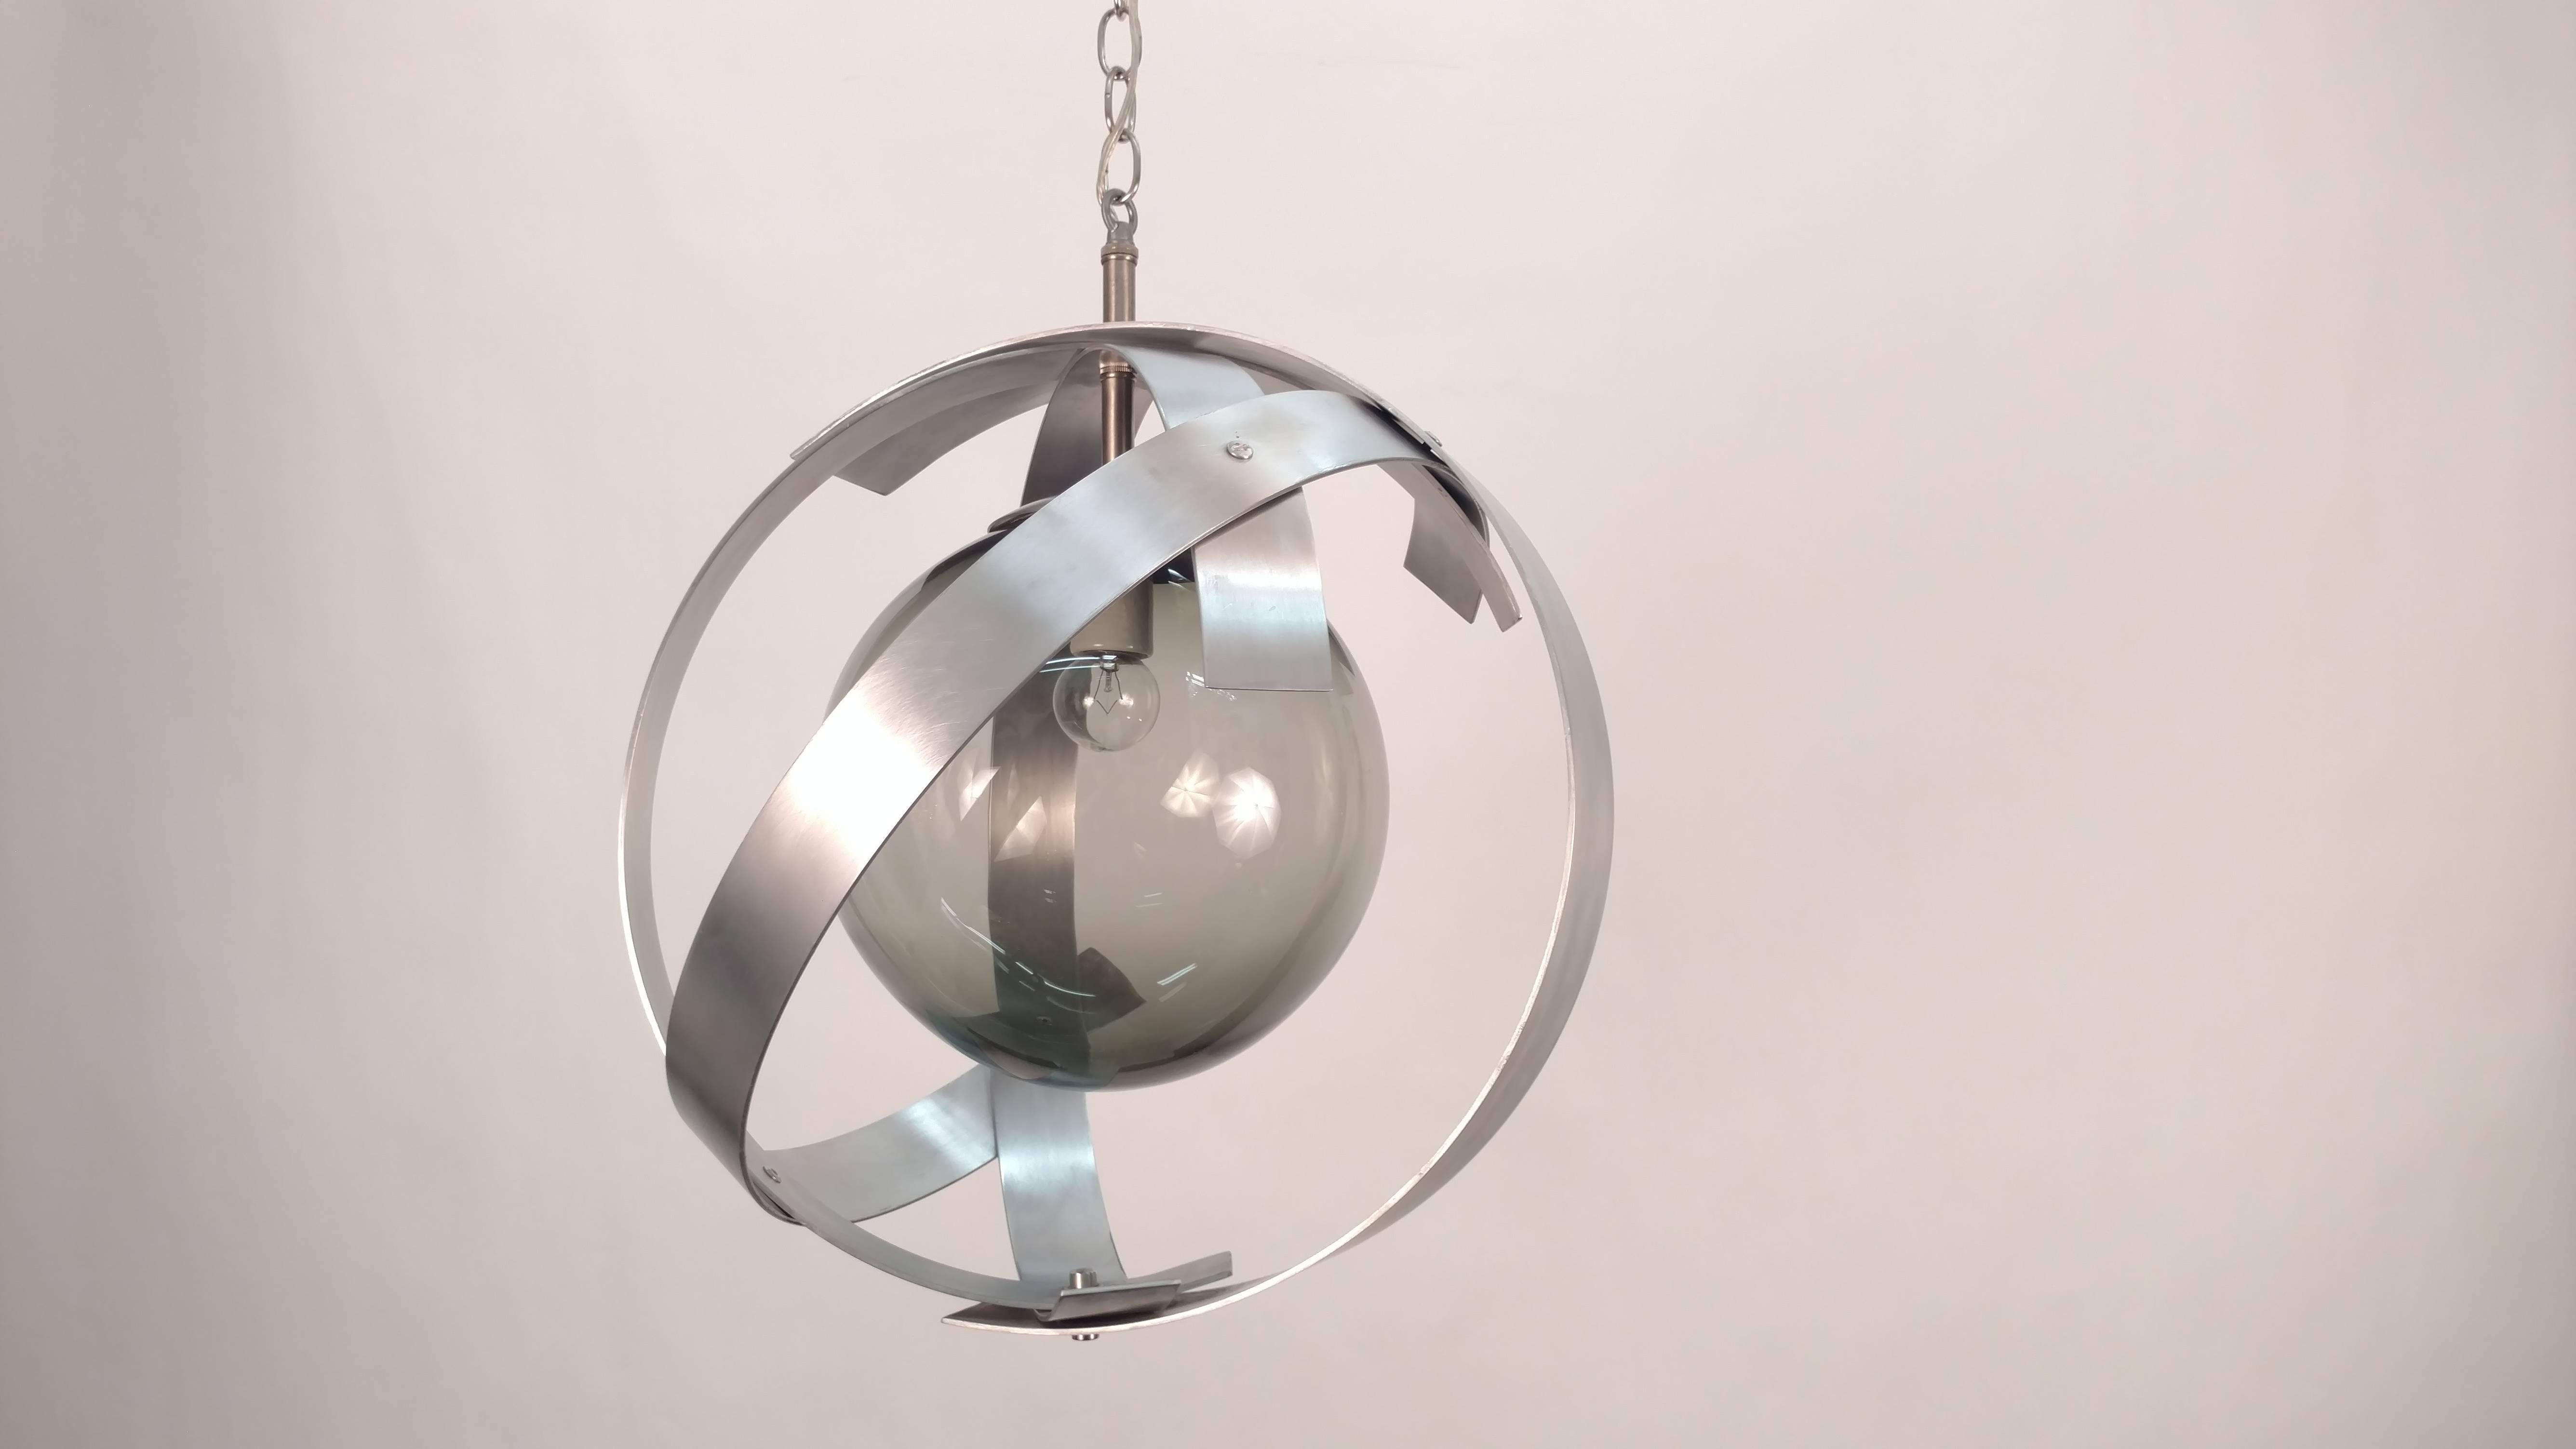 Orbit aluminium frames with smoked glass globes.
Newly wired.
Two different sizes:
Main picture: Two side fixtures are 36in H x 16in D
Middle pendant is 39in H x 18in D.

  